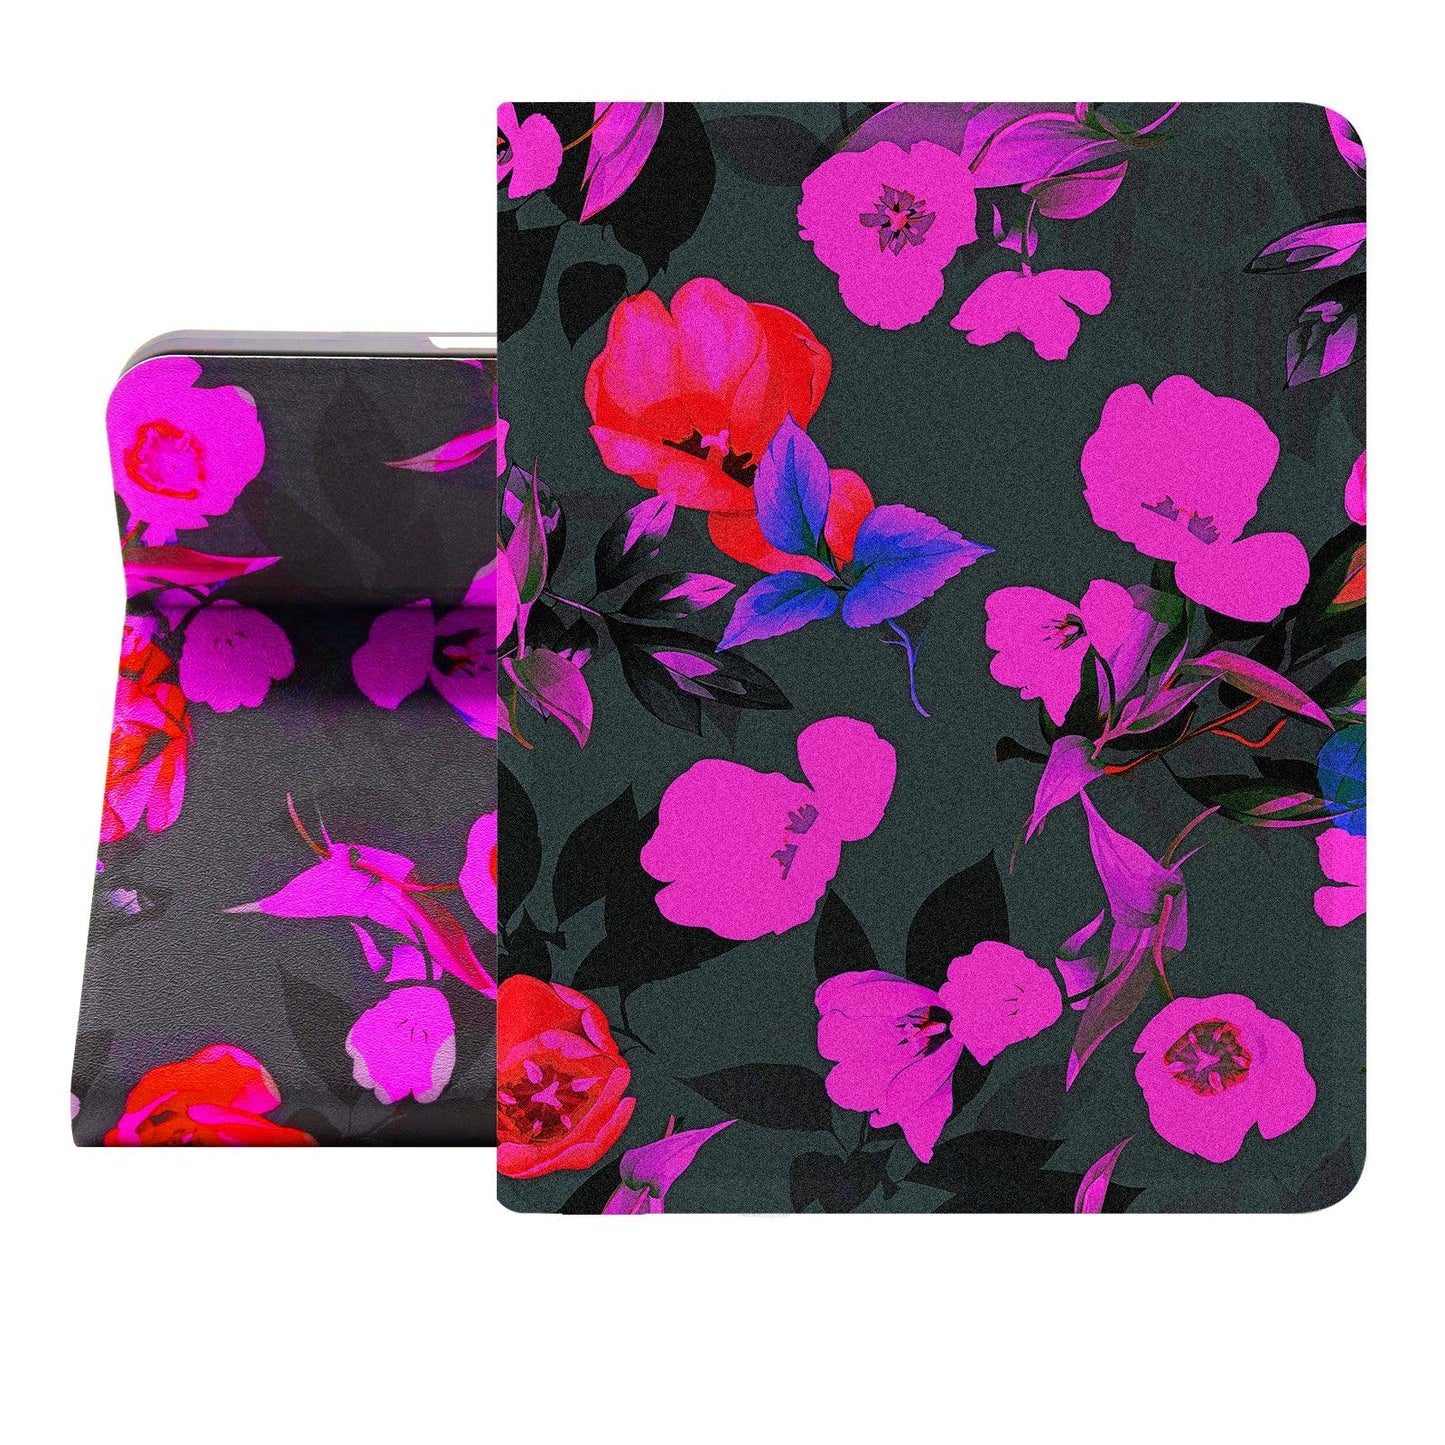 iPad Air 4th/5th Generation Contemporary Flower Case (10.9 Inch) (Tulips with Leaf) - Berkin Arts